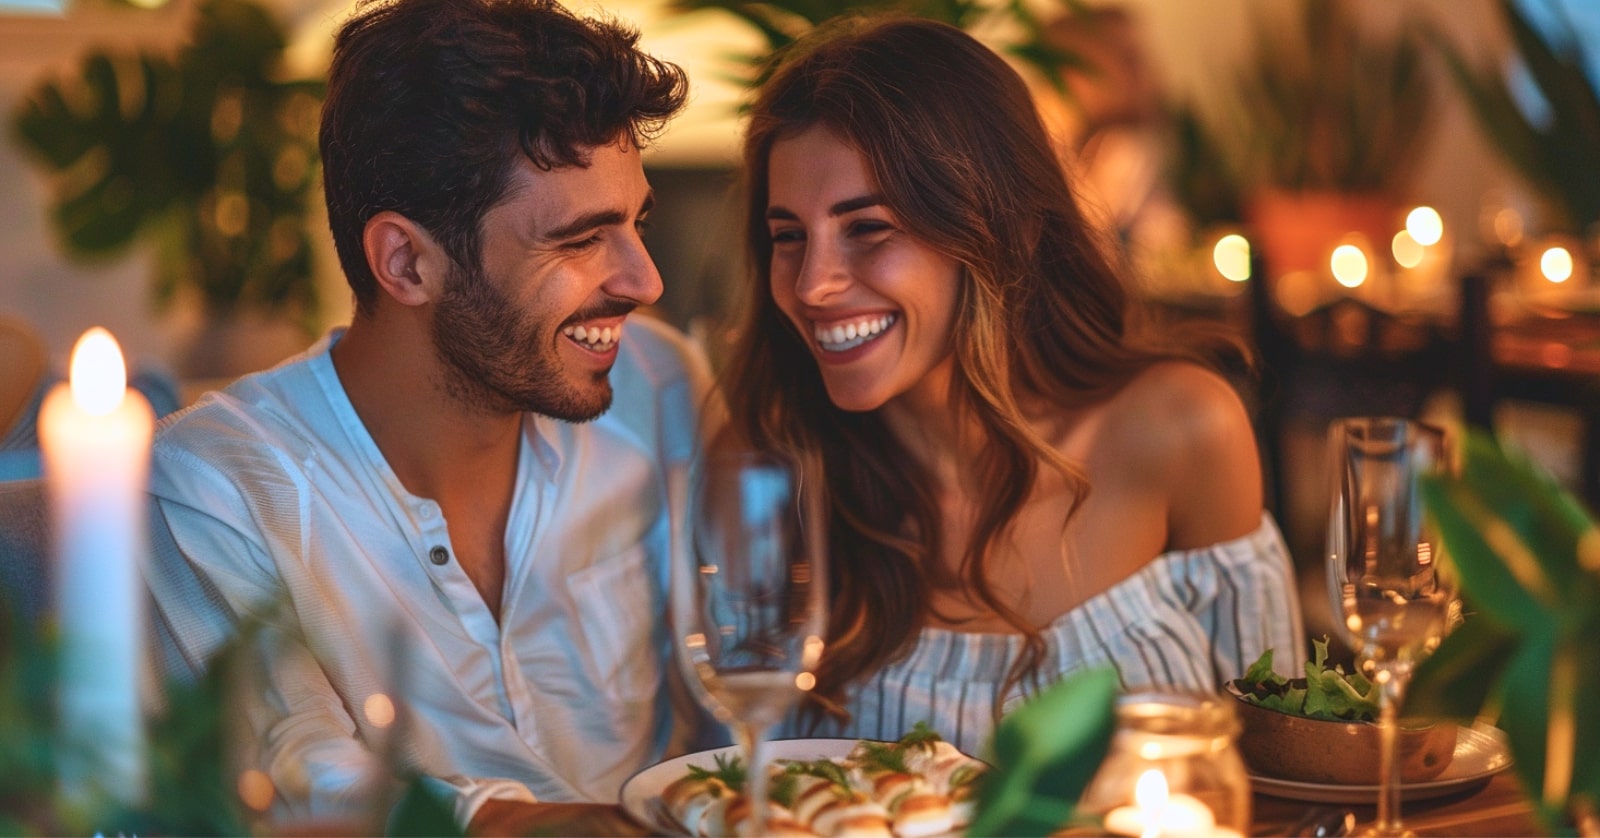 A couple sits at a table enjoying a romantic dinner with soft candlelight. They are smiling at each other, surrounded by plants and elegant table settings, creating a warm and intimate atmosphere.